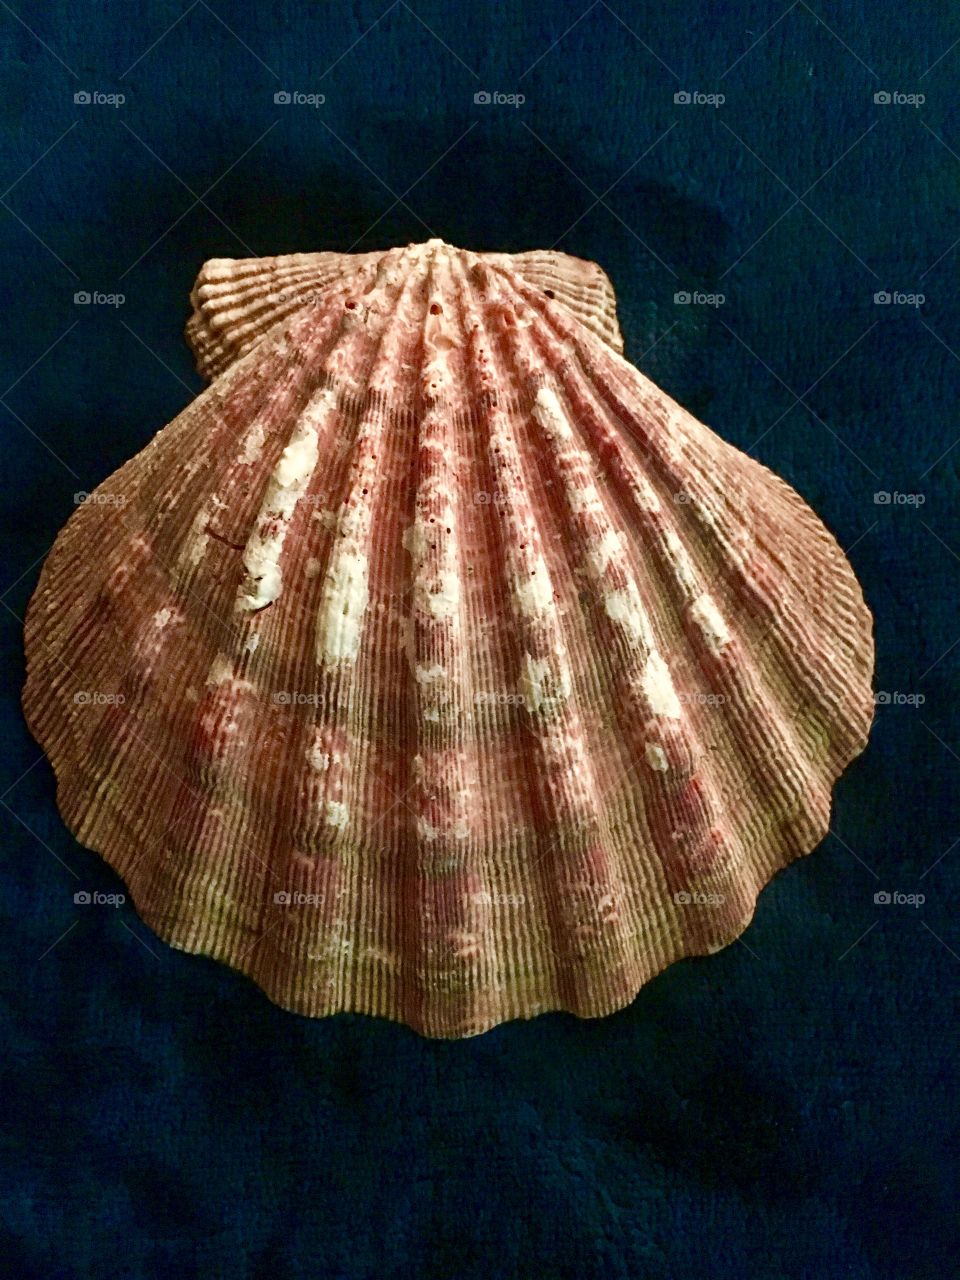 Scallop - Part of my seashell and rock collection